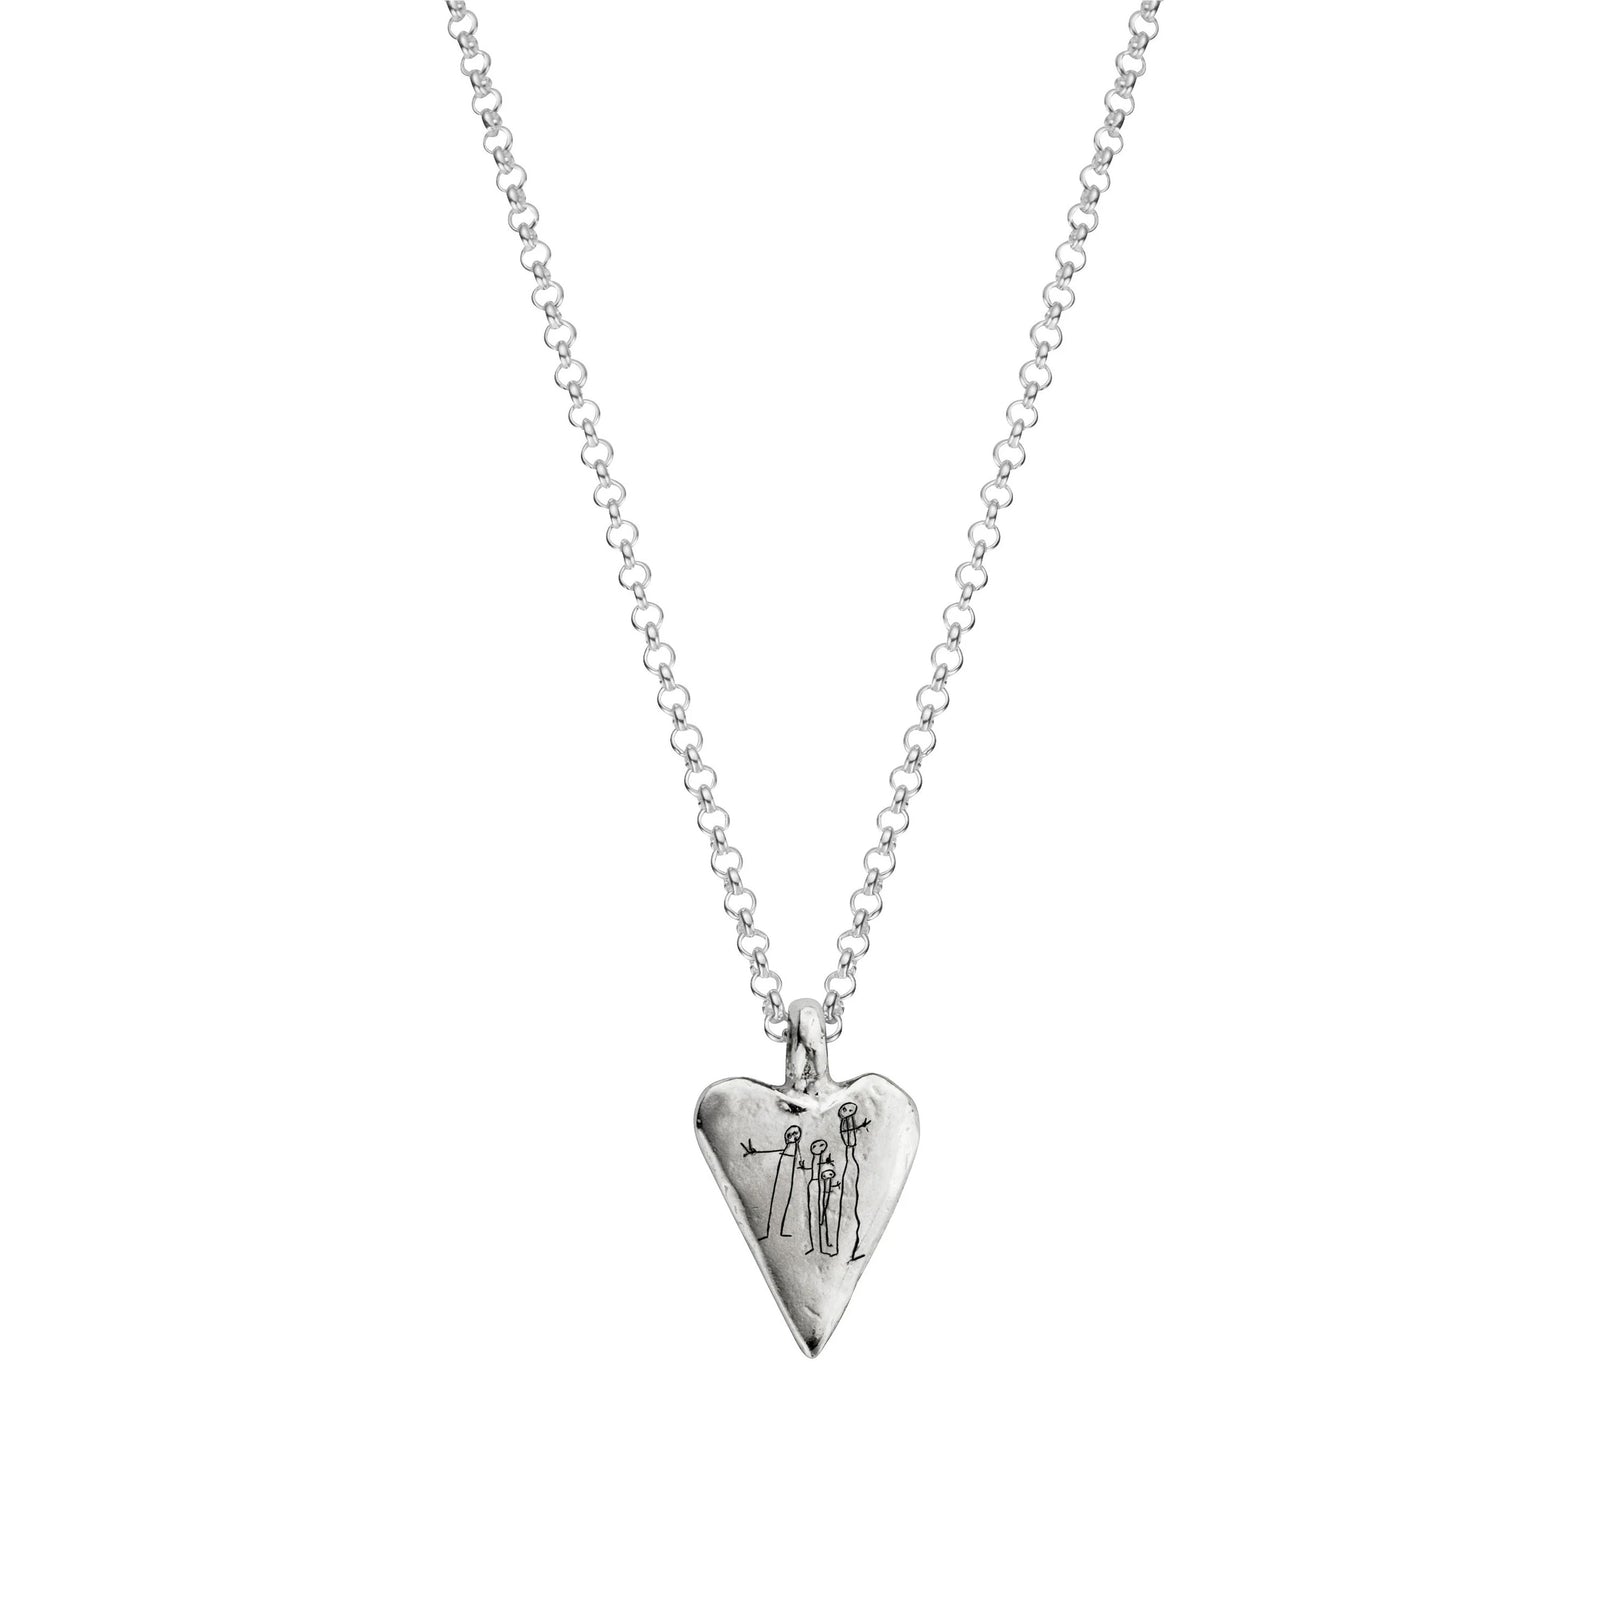 Silver Medium Heart Necklace with Handwriting